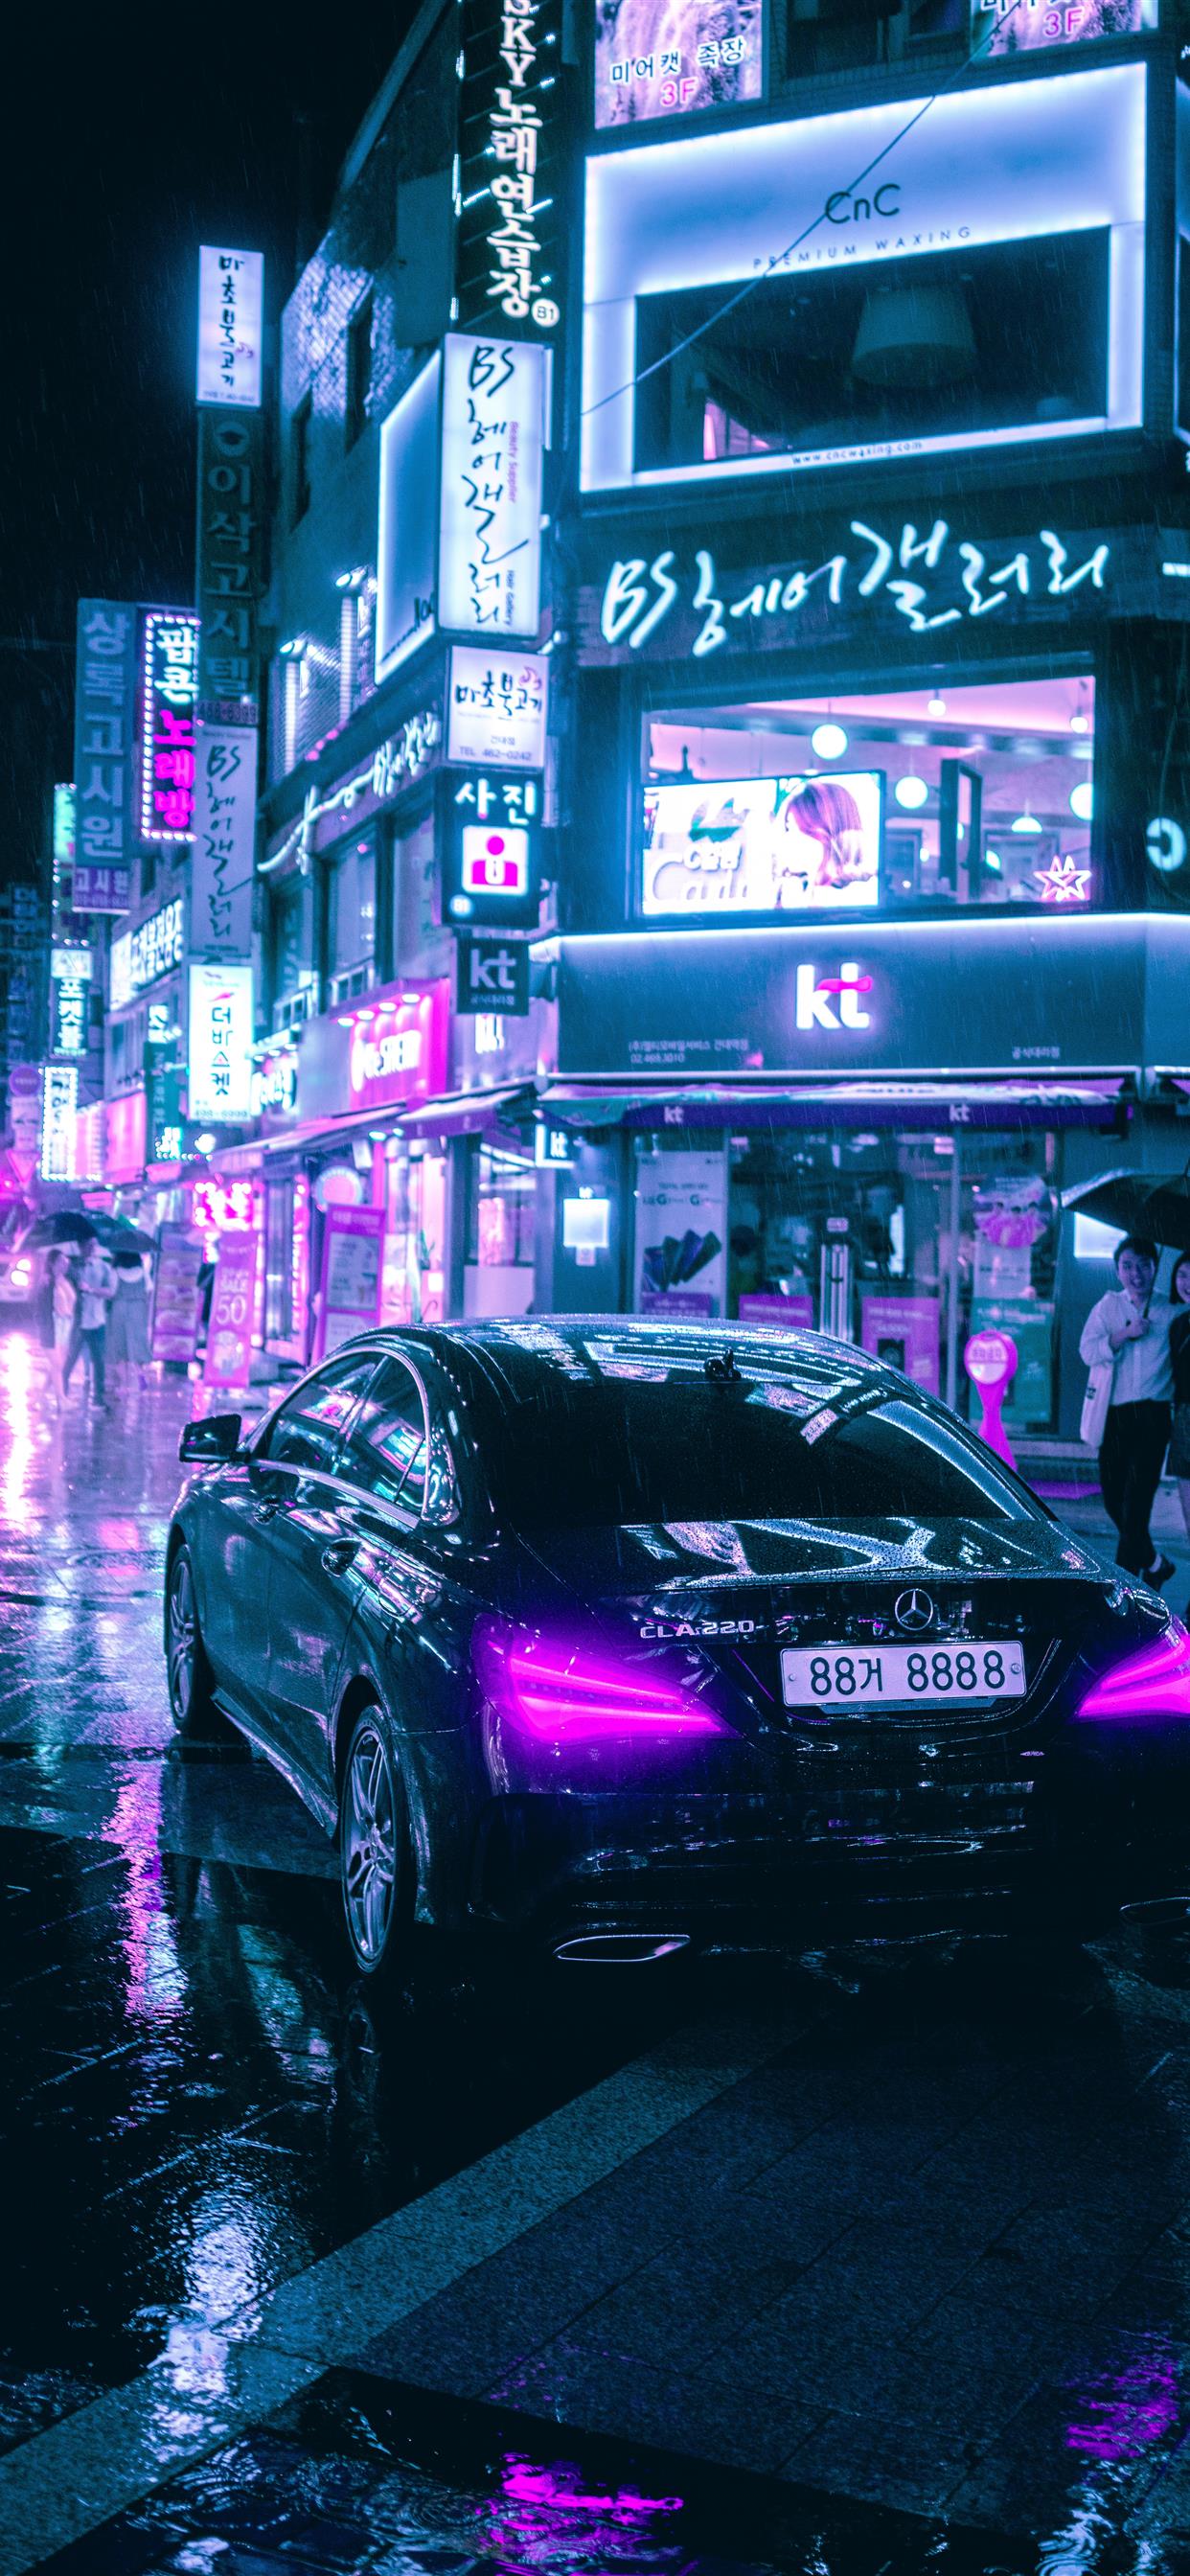 Aesthetic car parked in the city at night - Cyberpunk